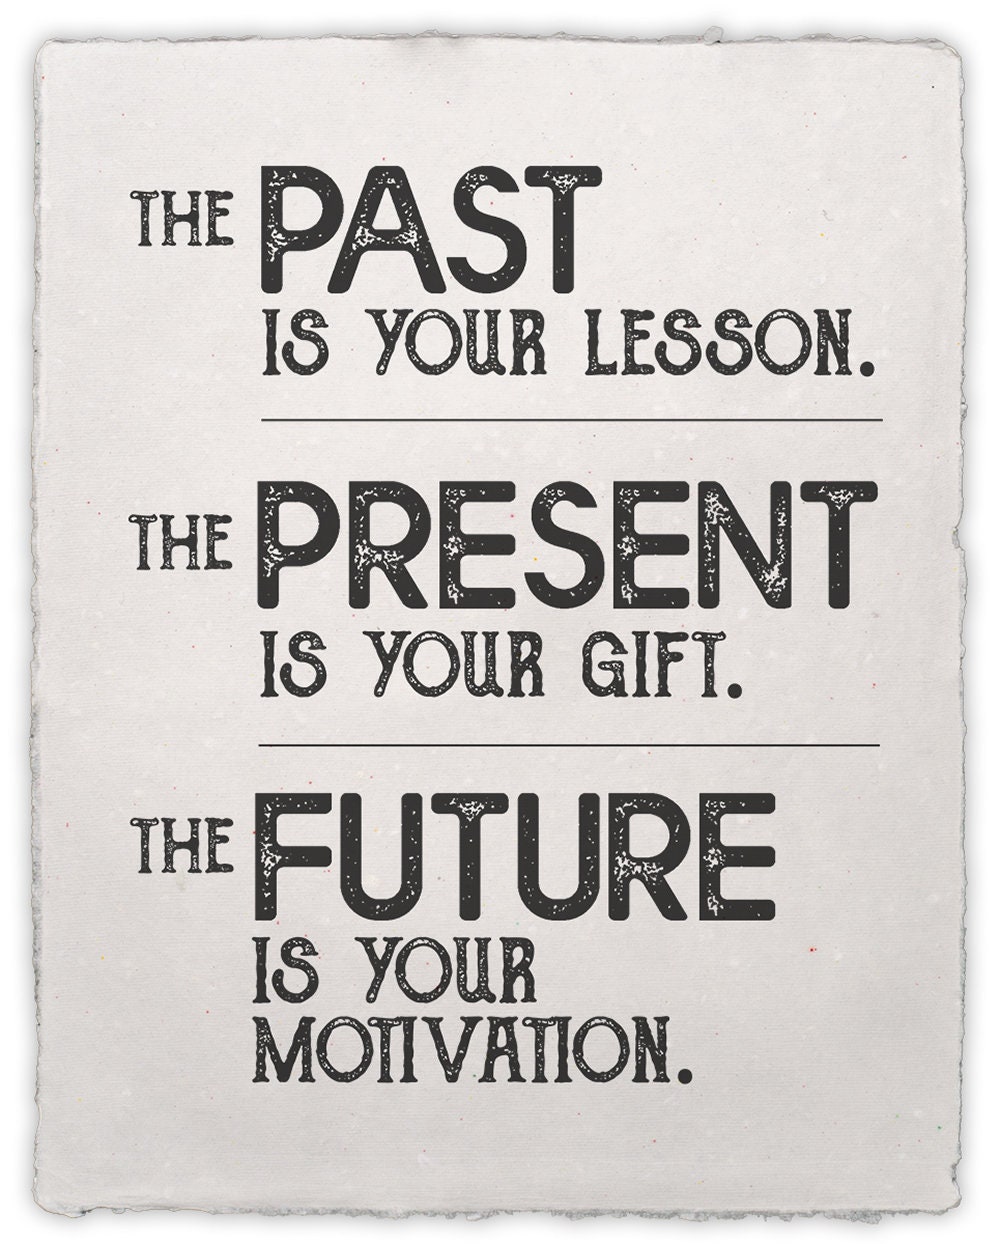 The past is where you learn your lessons to build your present and